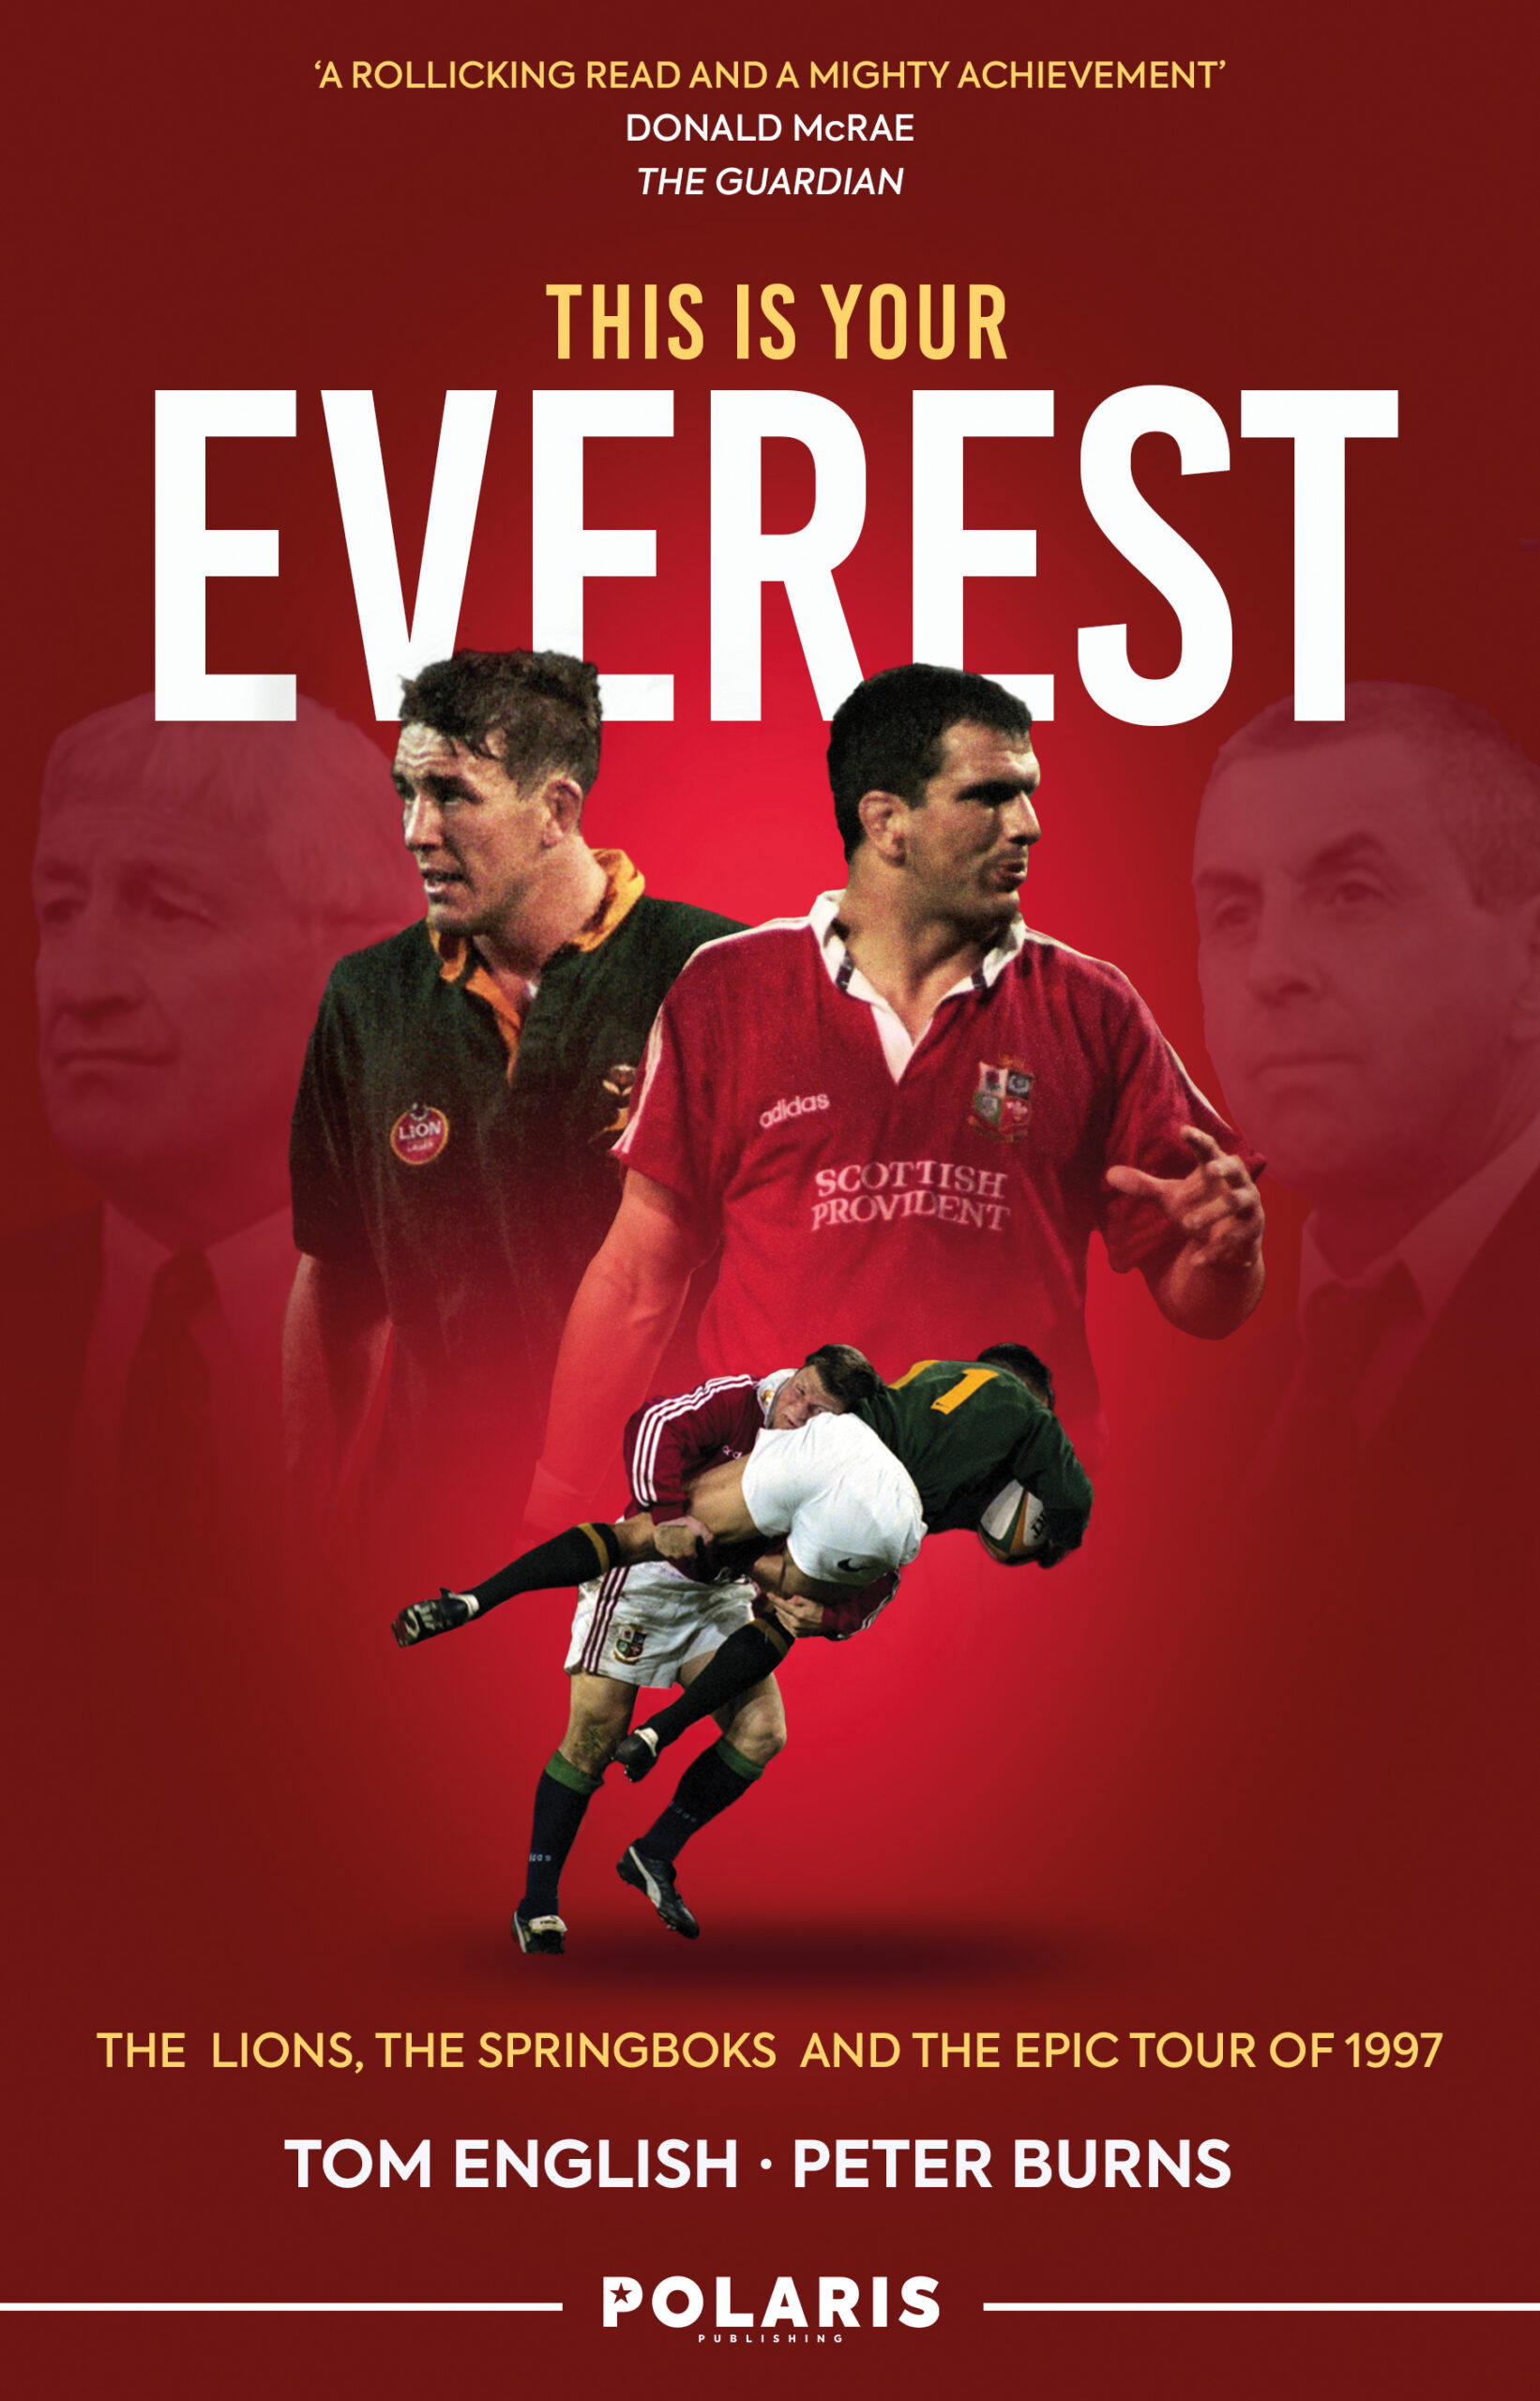 This is Your Everest by Tom English & Peter Burns